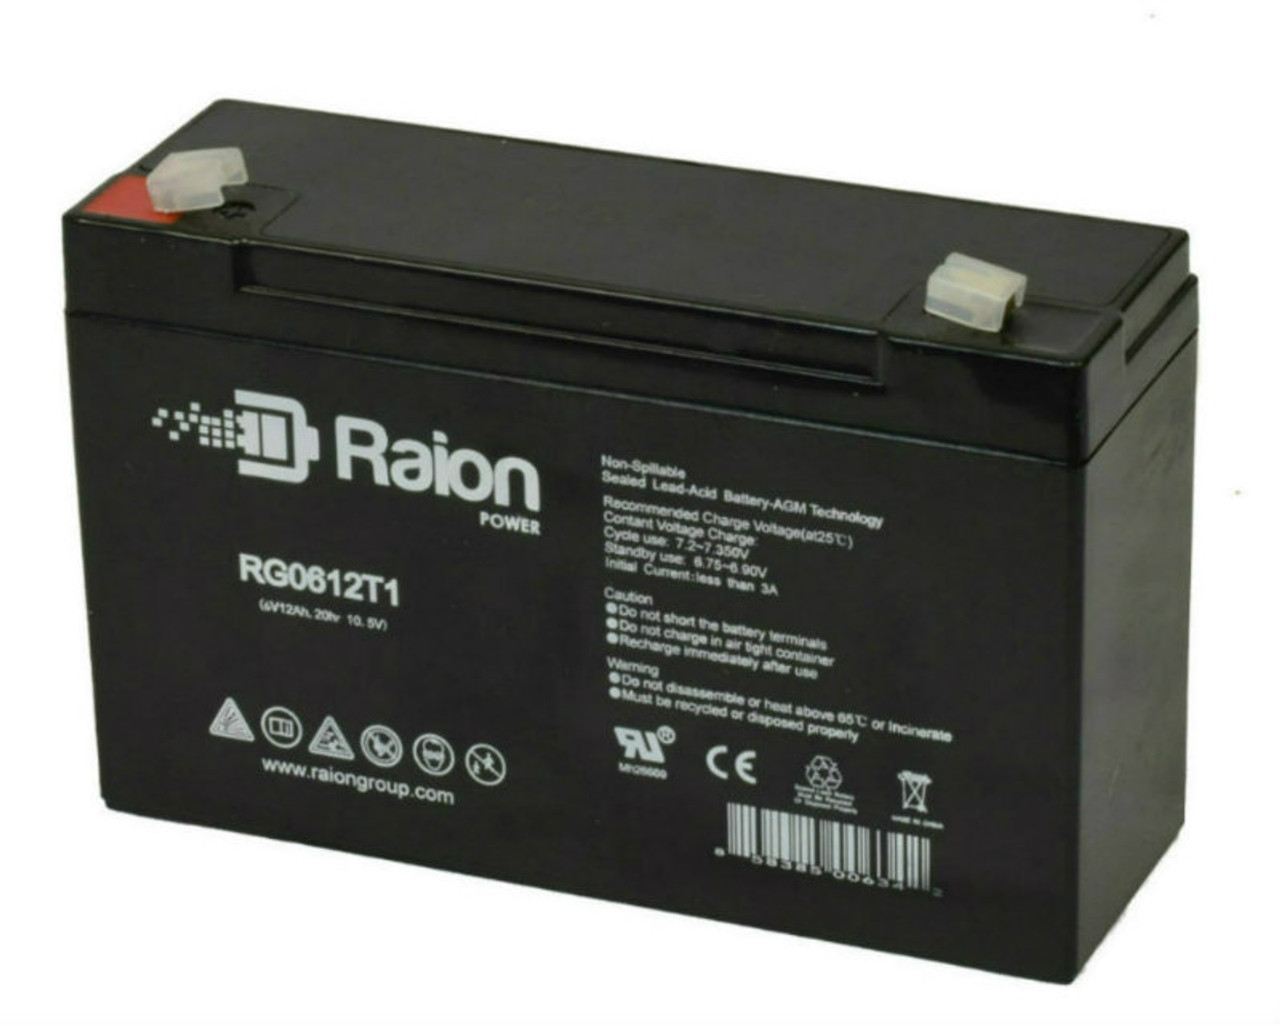 Raion Power RG06120T1 Replacement Emergency Light Battery for Trio TL930011